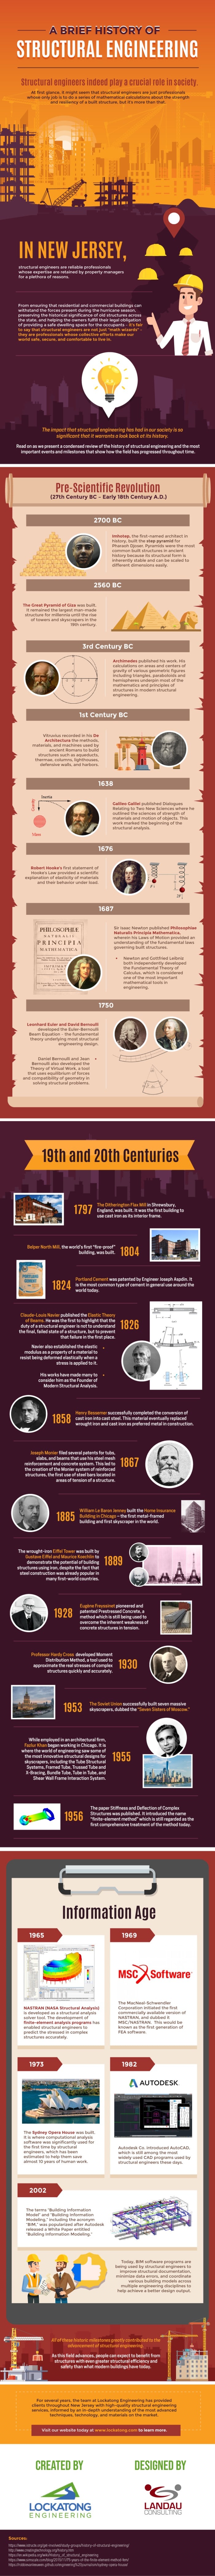 A Brief History of Structural Engineering (Infographic)